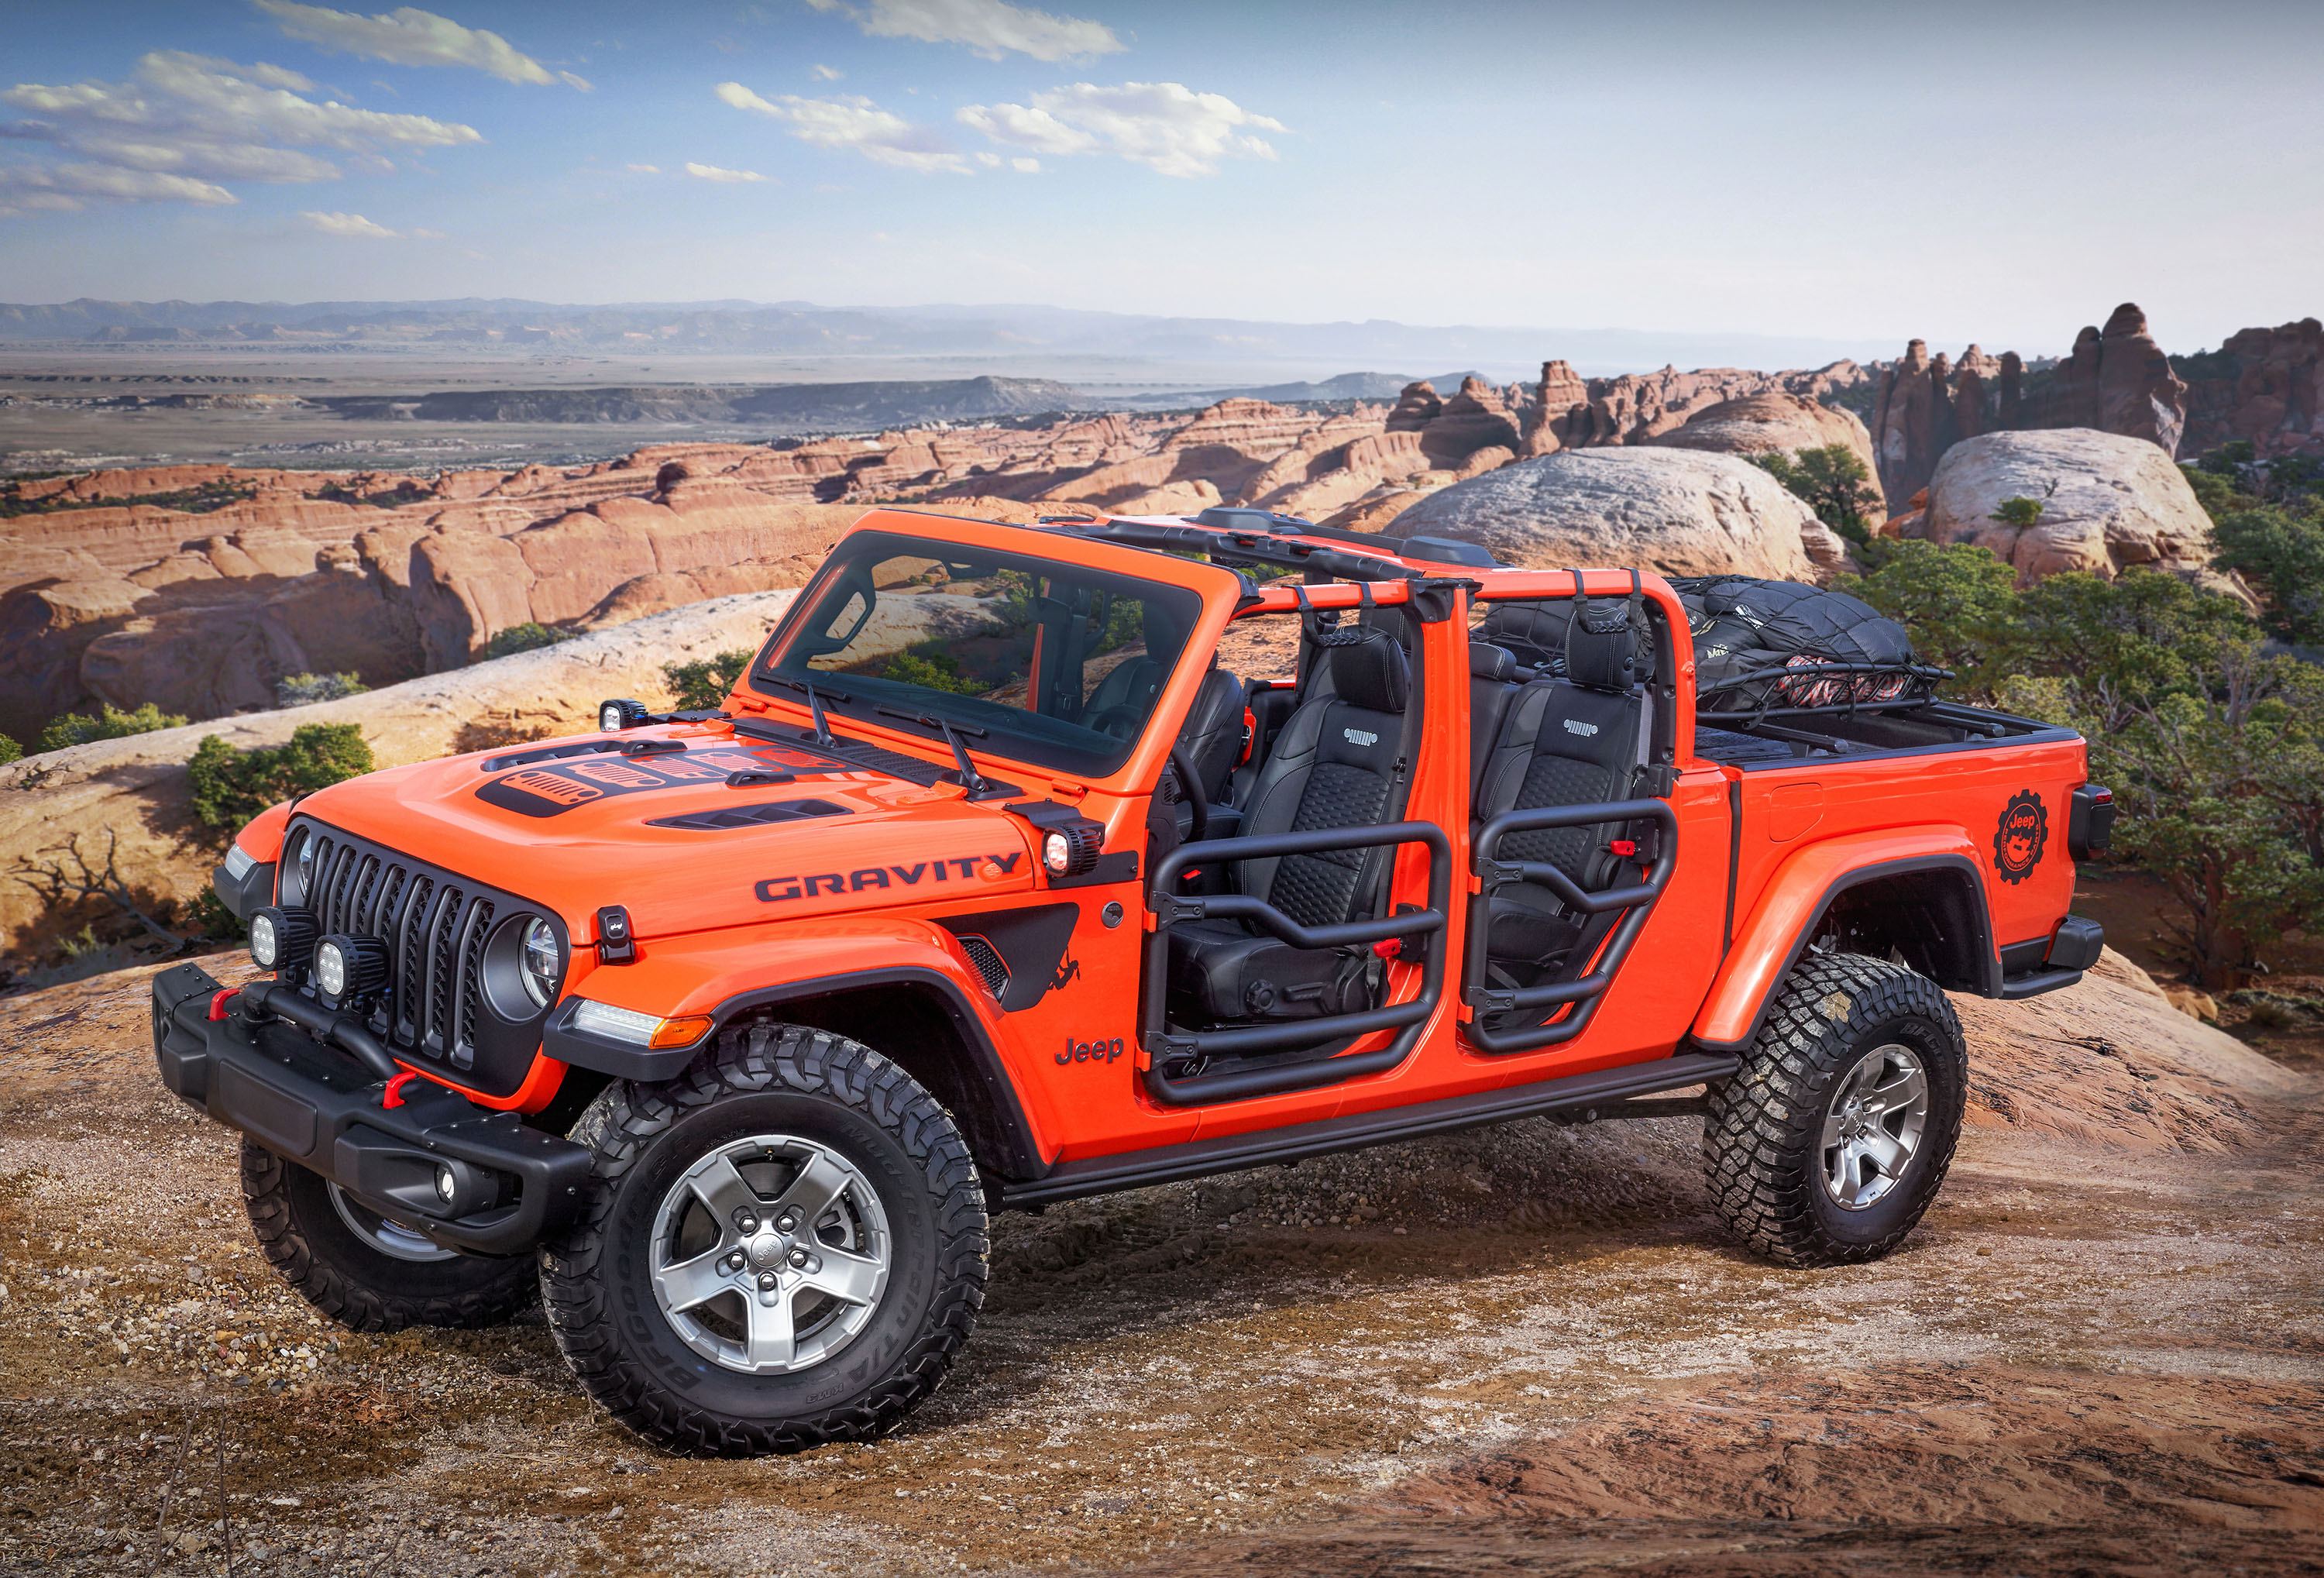 Jeep Gladiator Concepts Fill Us with WANT » AutoGuide.com News